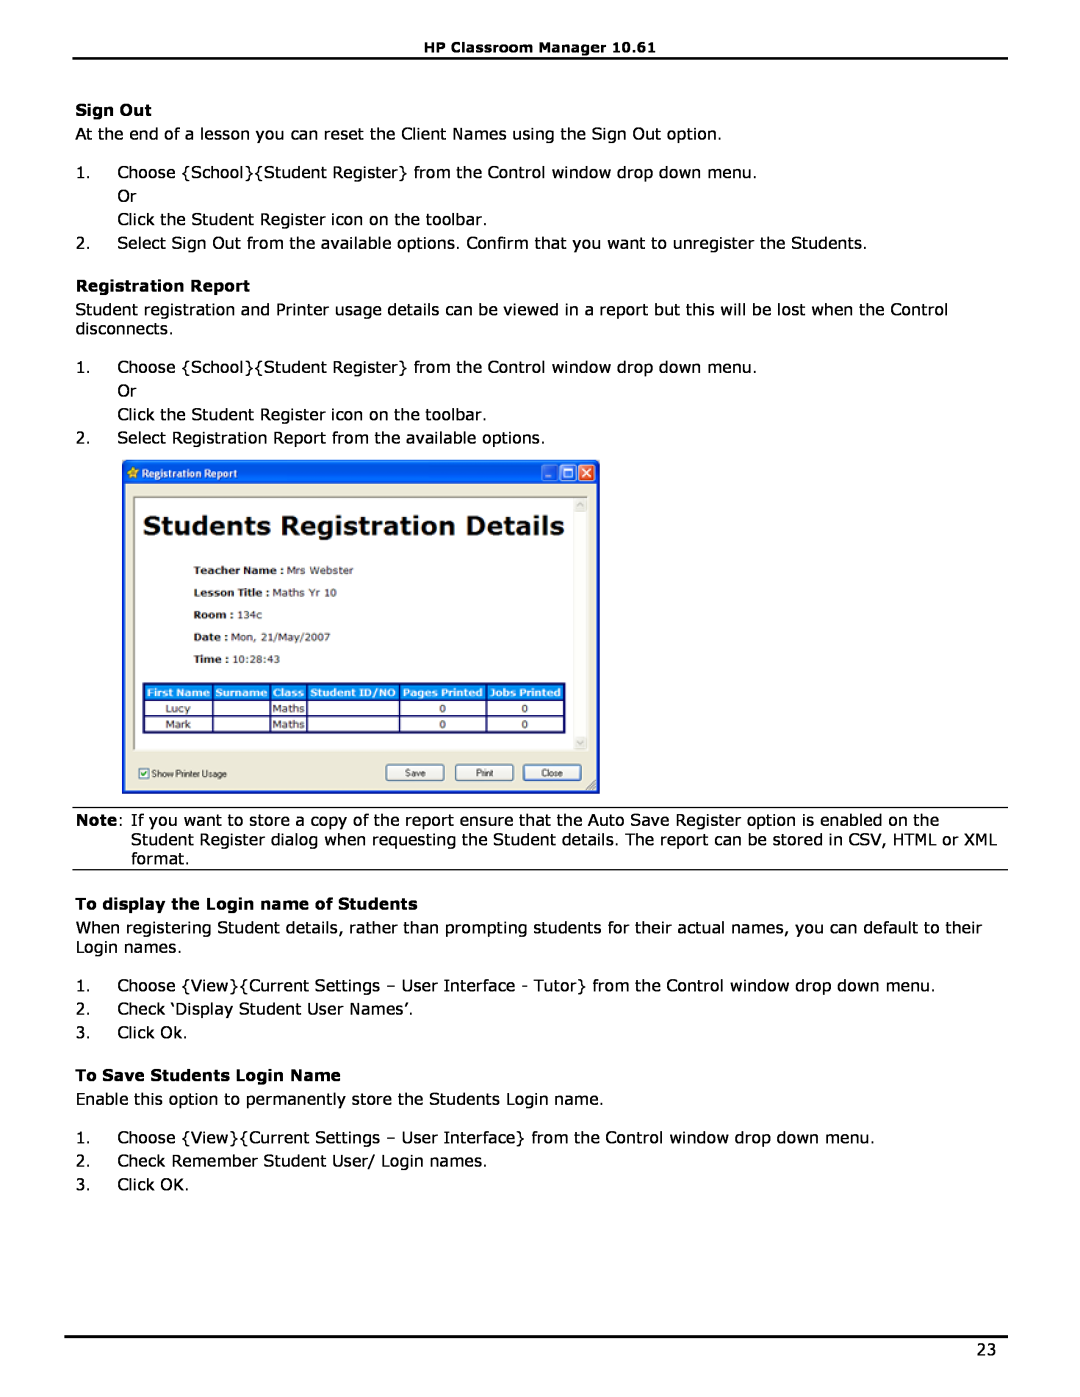 HP Classroom Manager Sign Out, Registration Report, To display the Login name of Students, To Save Students Login Name 